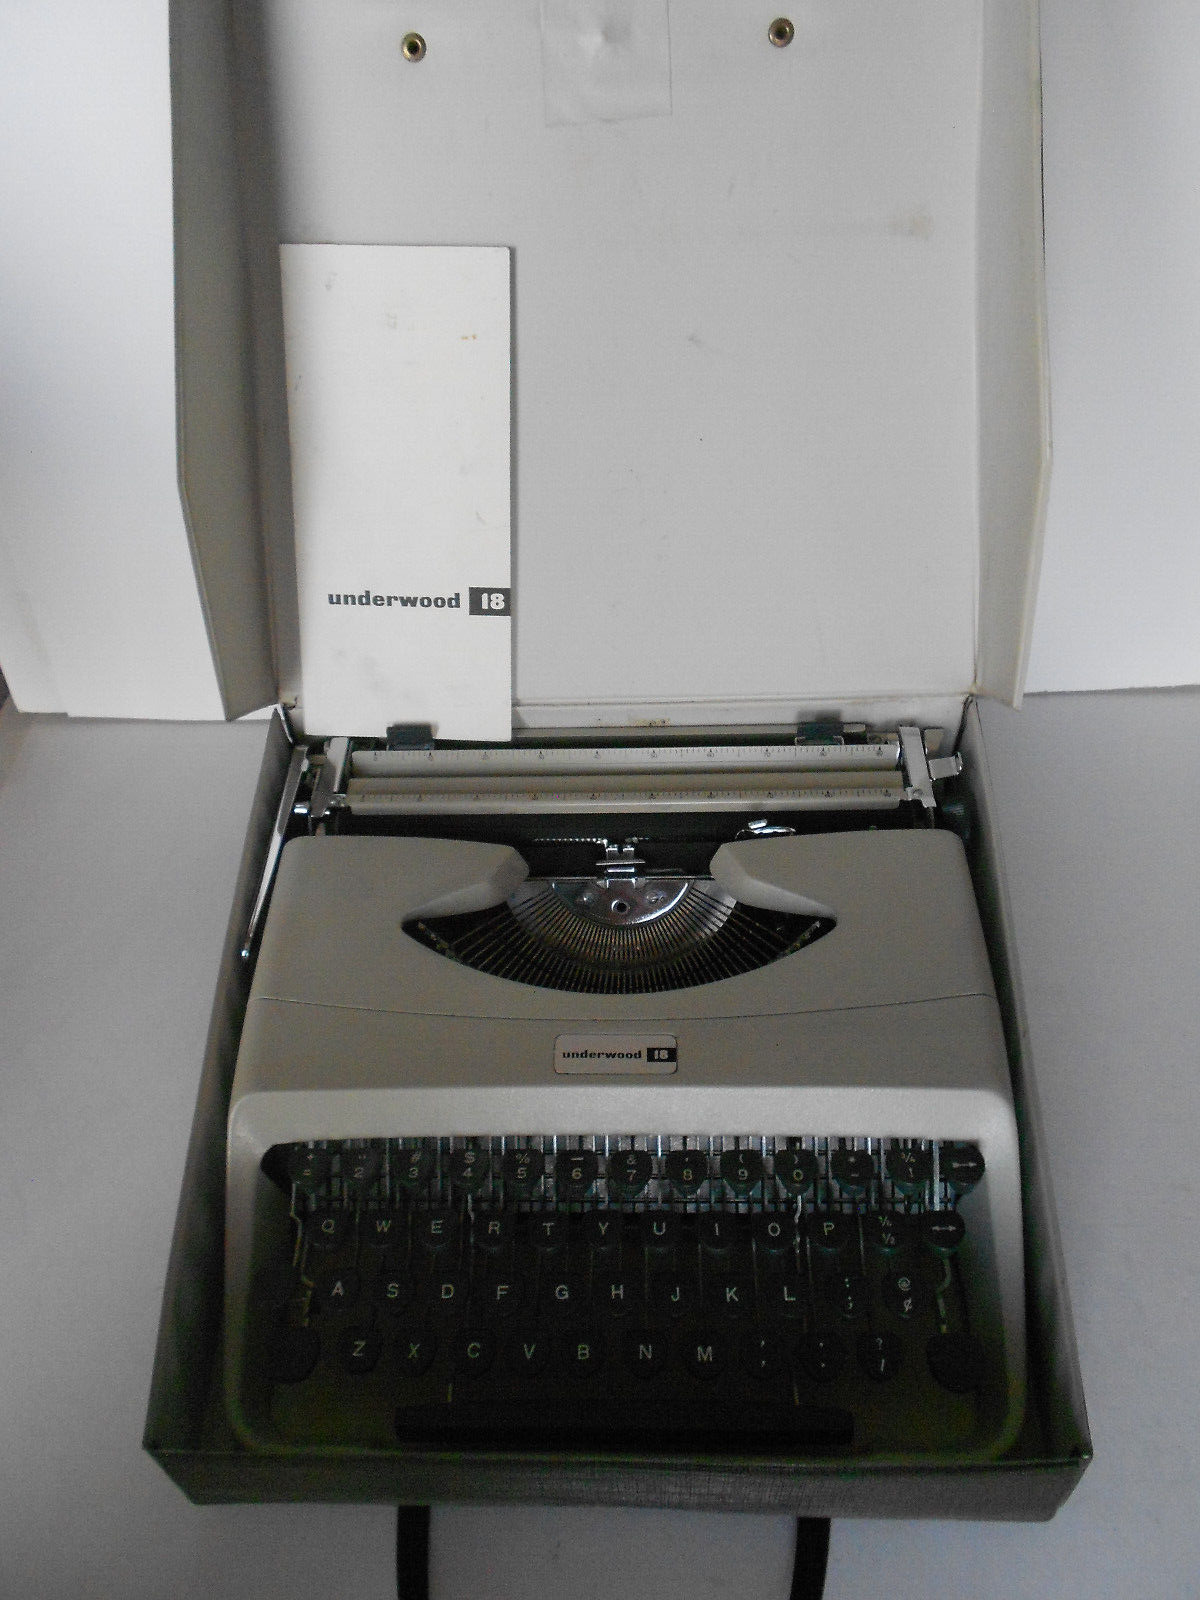 Vtg Underwood 18 Portable Manual Typewriter with Case & User Guide VGC